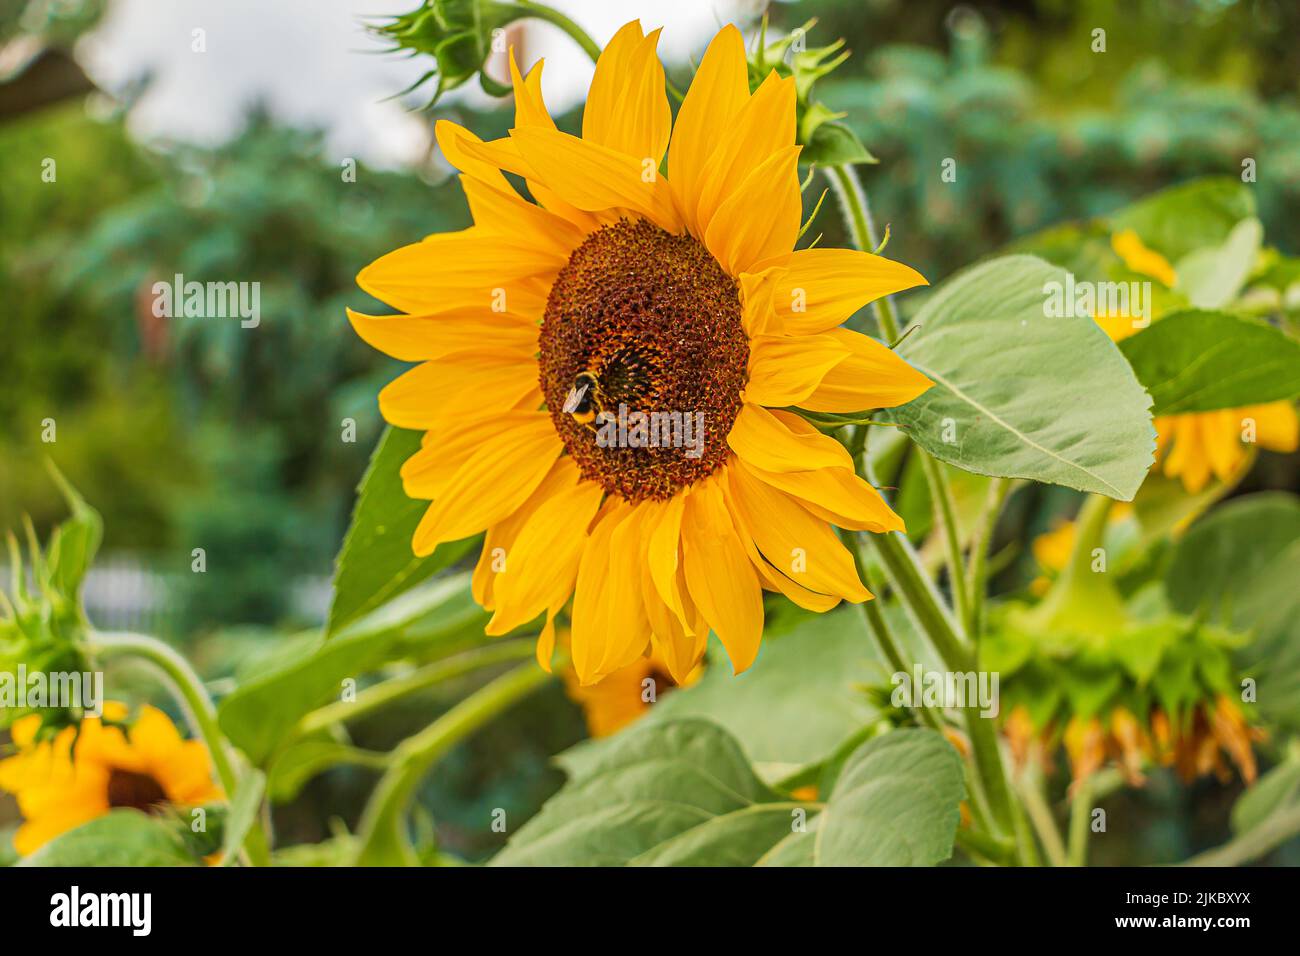 Single bee on a large sunflower in bloom. rich yellow leaves of an open flower. Sunflower seeds in the center of the flower. Green leaves of sunflower Stock Photo